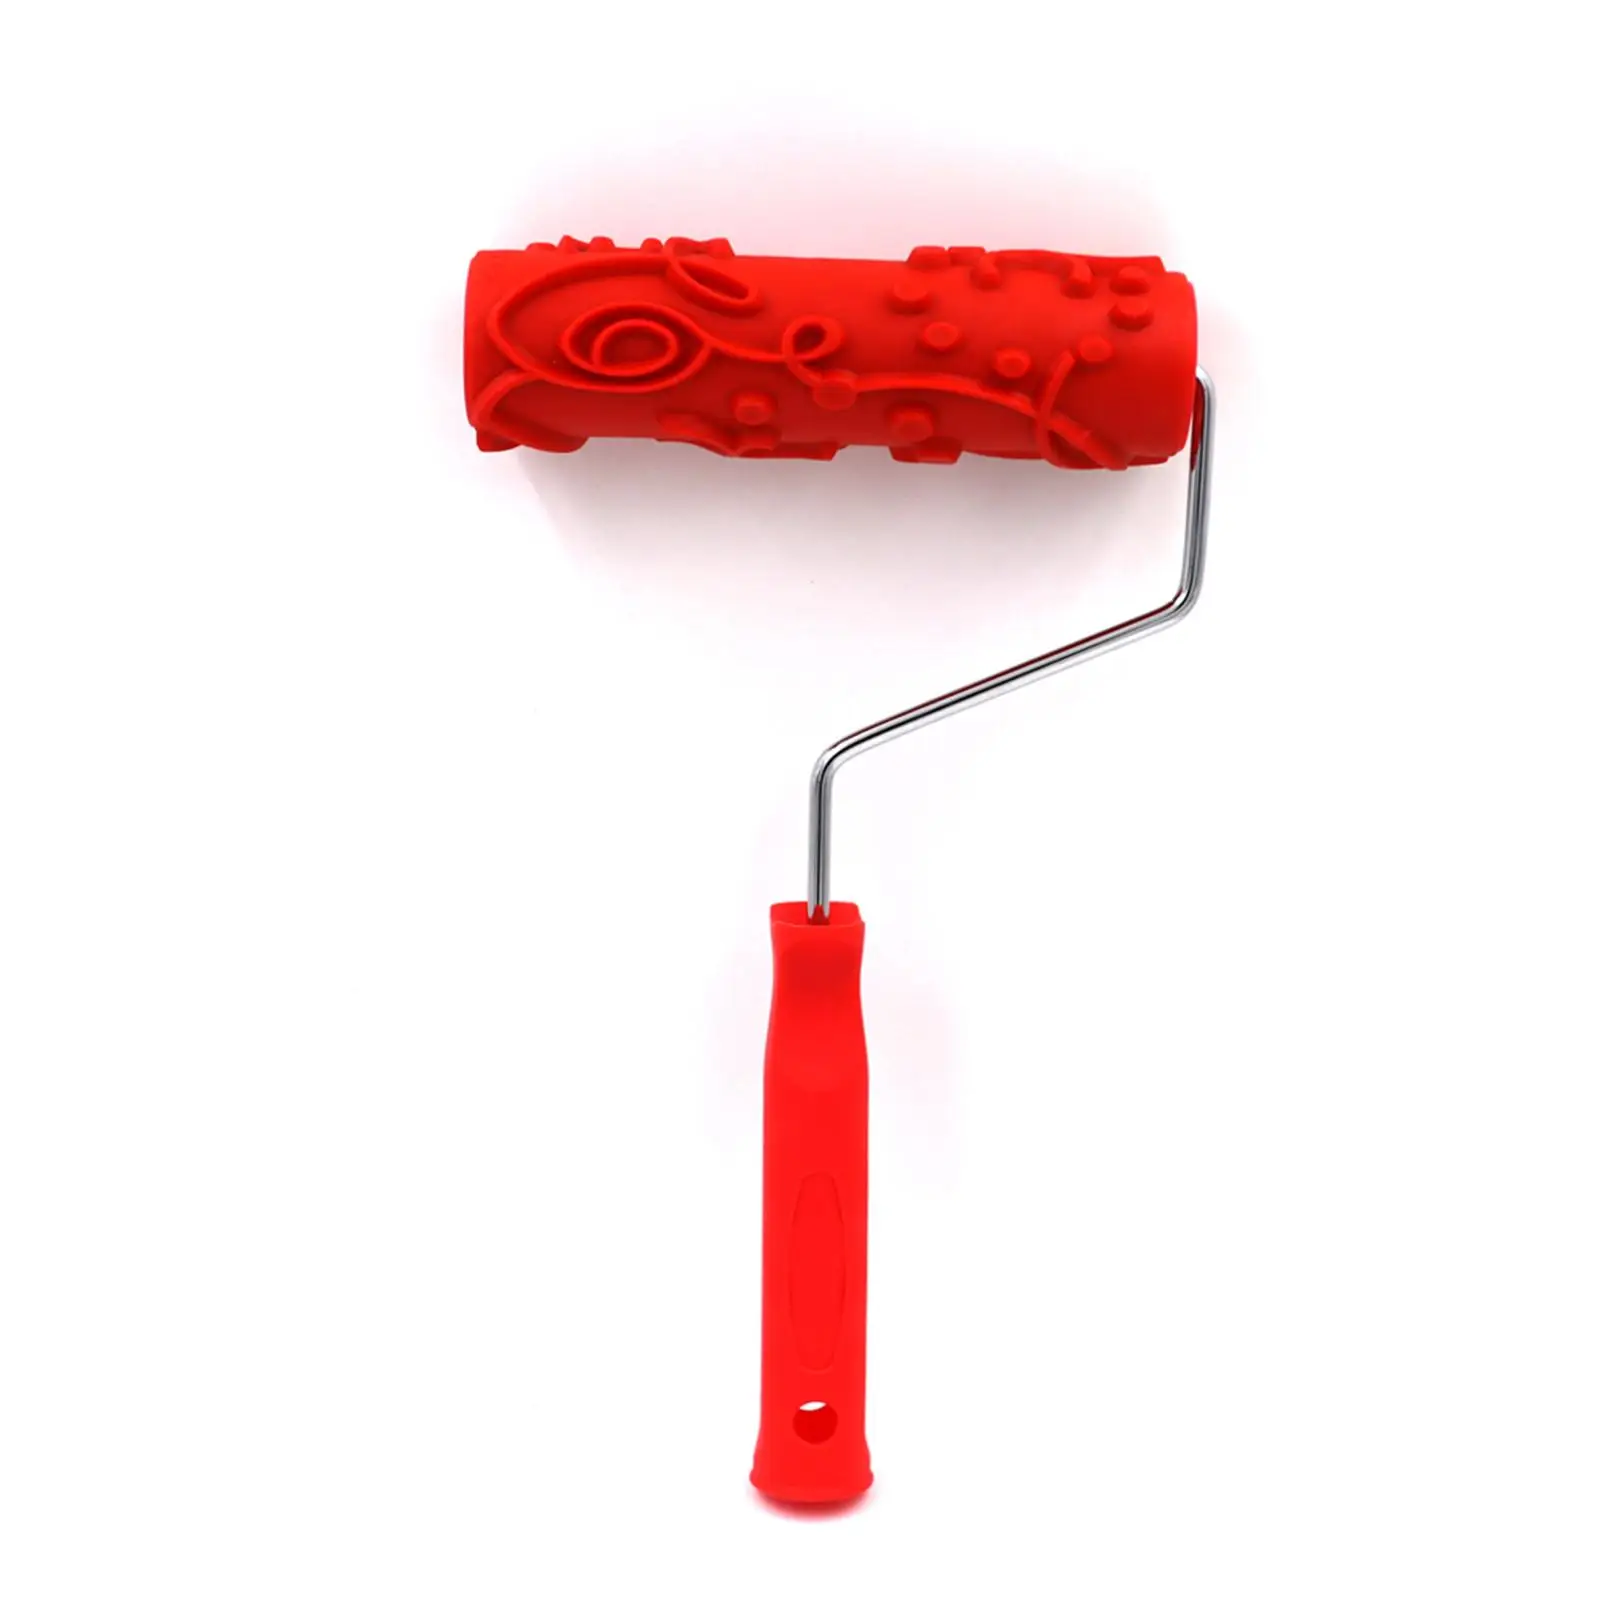 House Paint Roller with Handle Decoration DIY Rubber roller Decoration